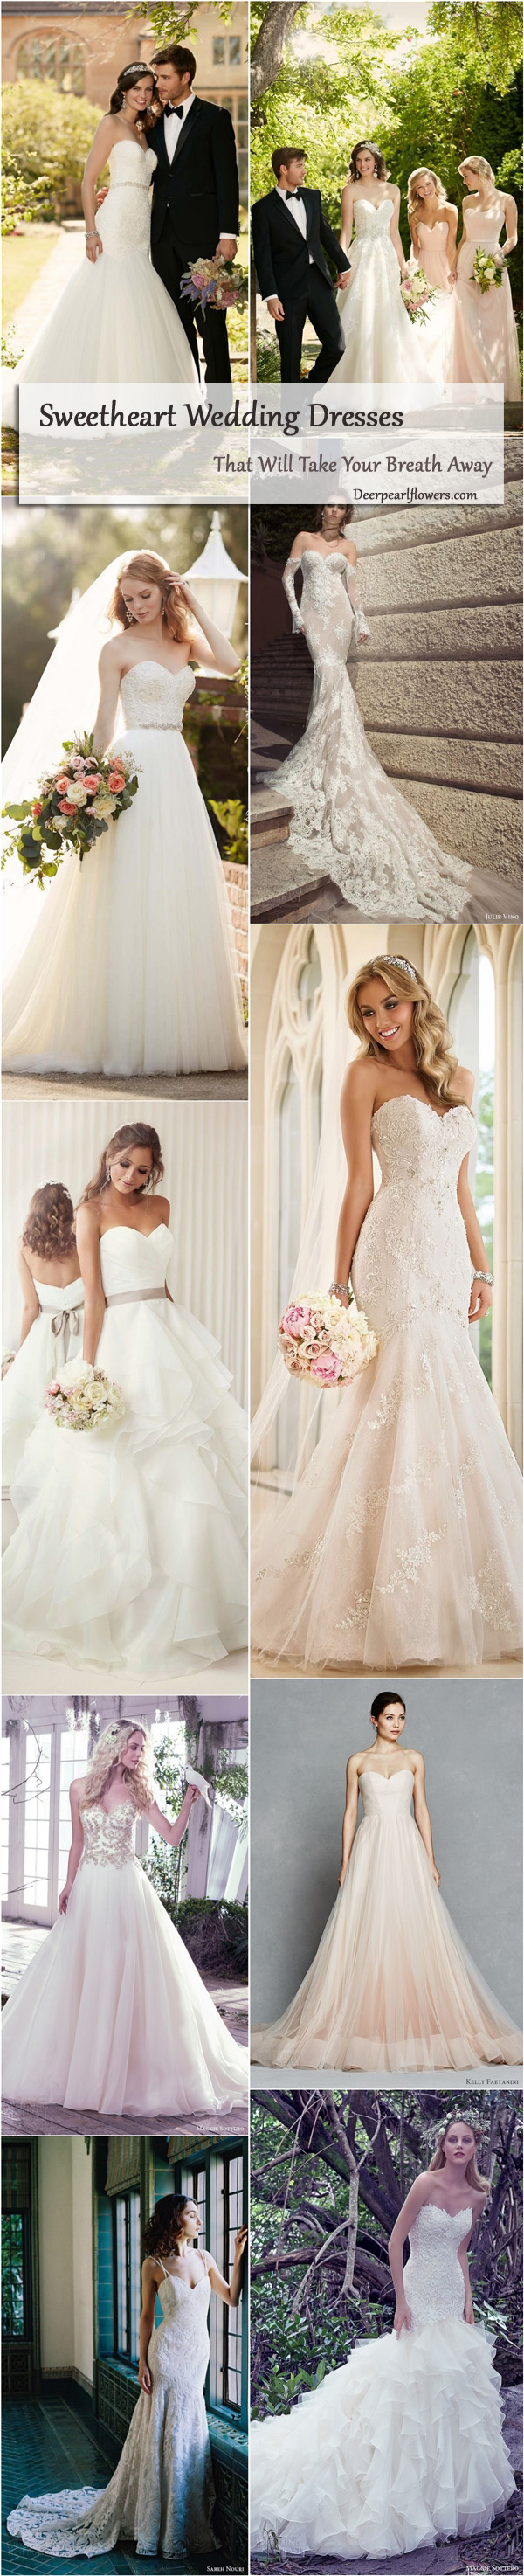 Sweetheart Wedding Dresses and Gowns